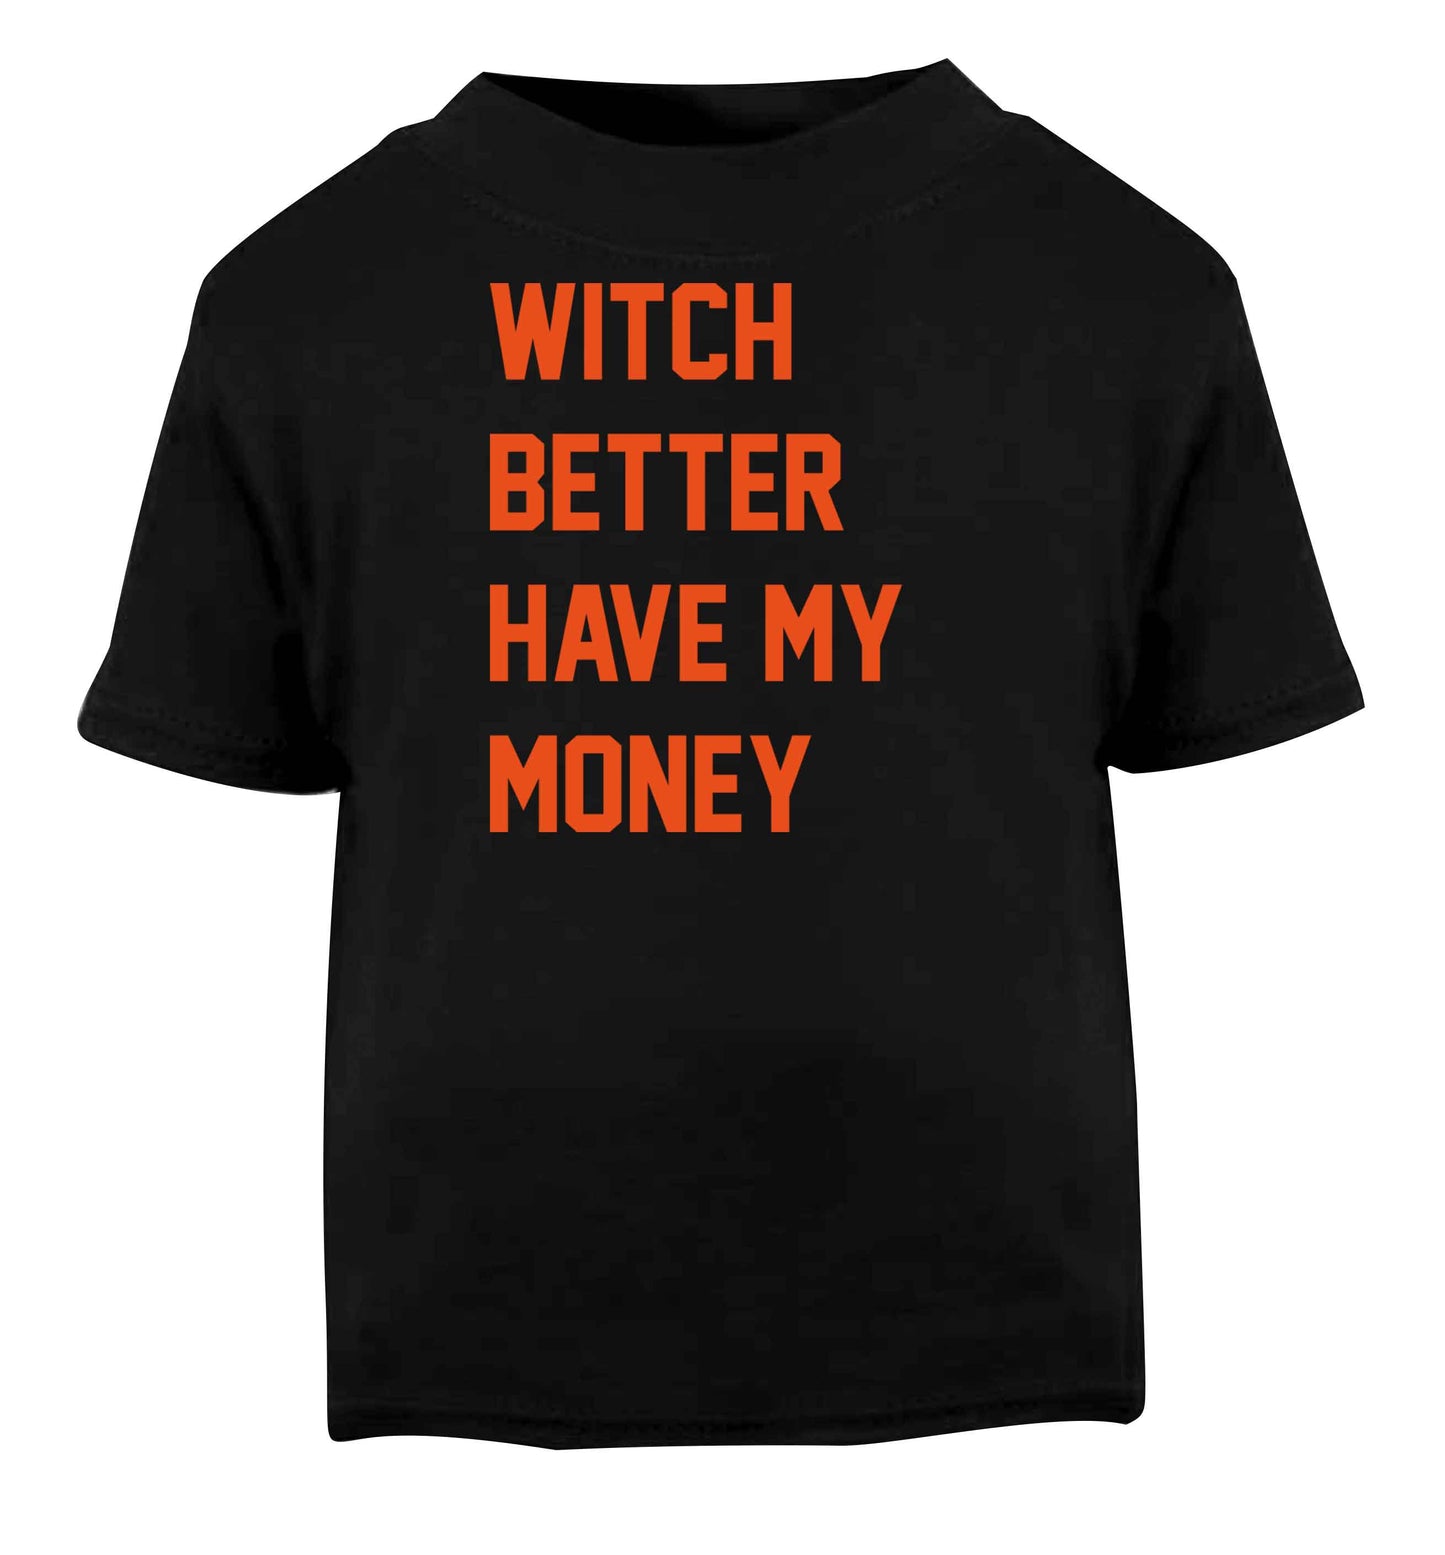 Witch better have my money Black baby toddler Tshirt 2 years